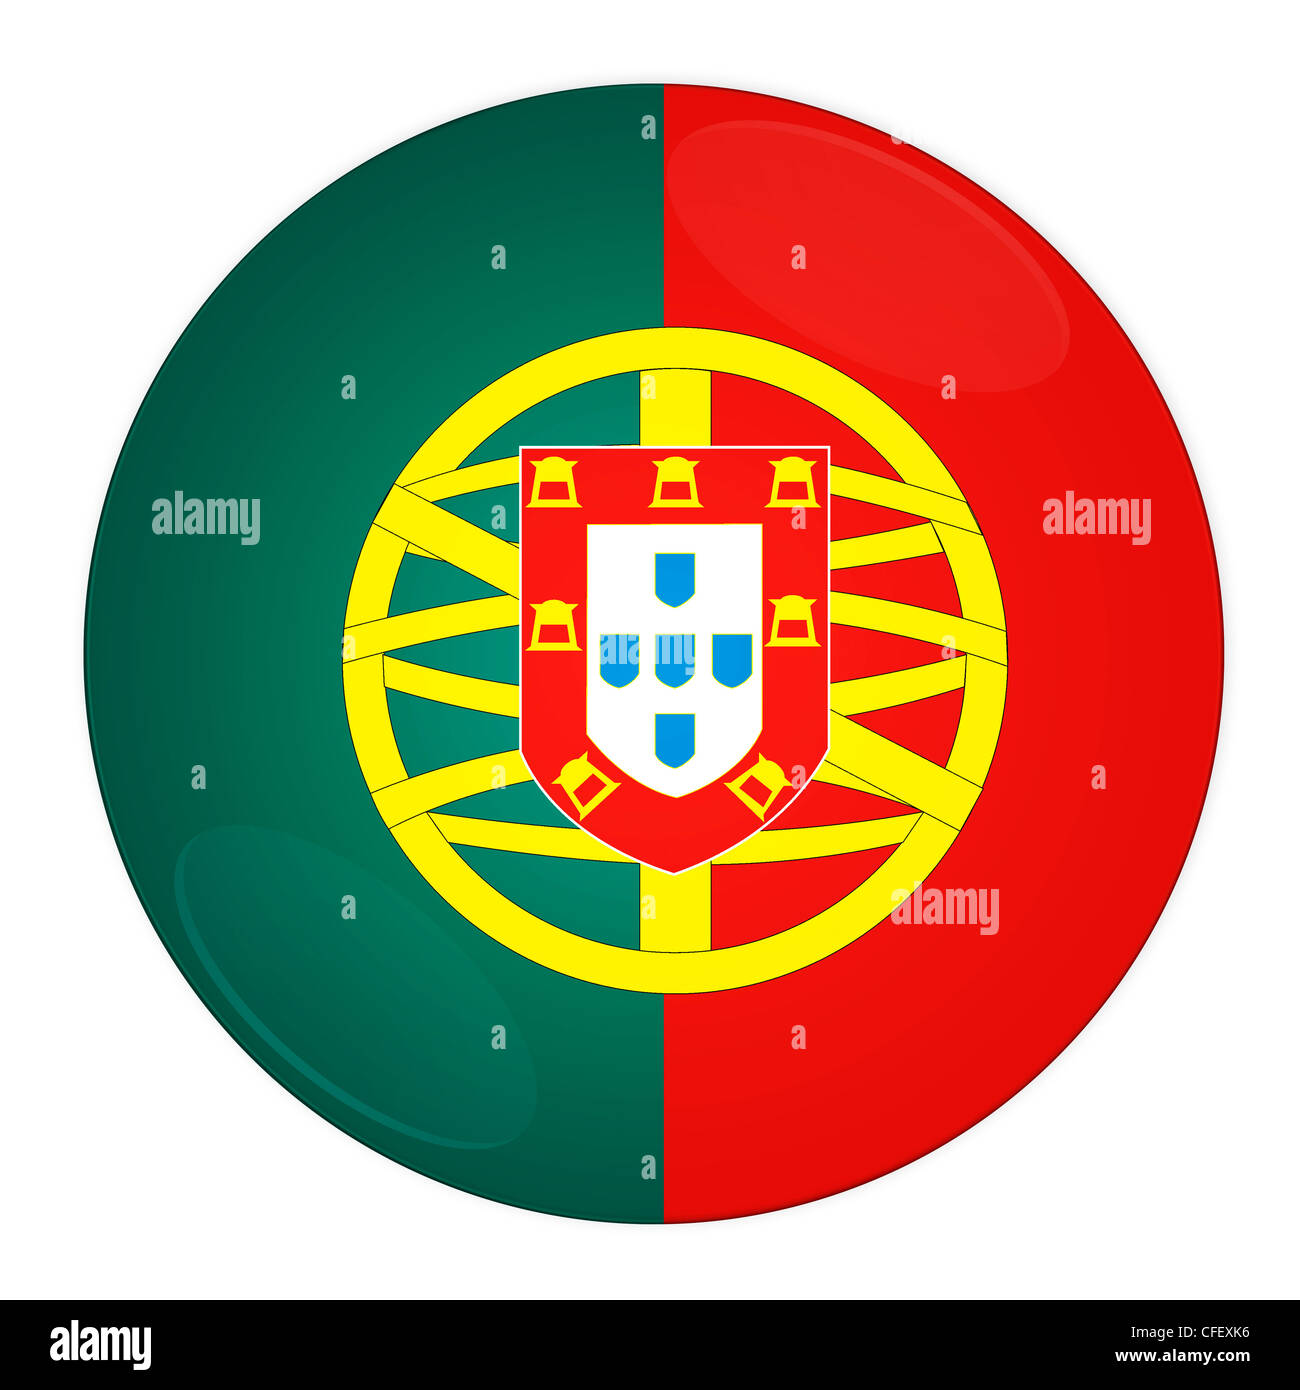 Abstract illustration: button with flag from Portugal country Stock Photo